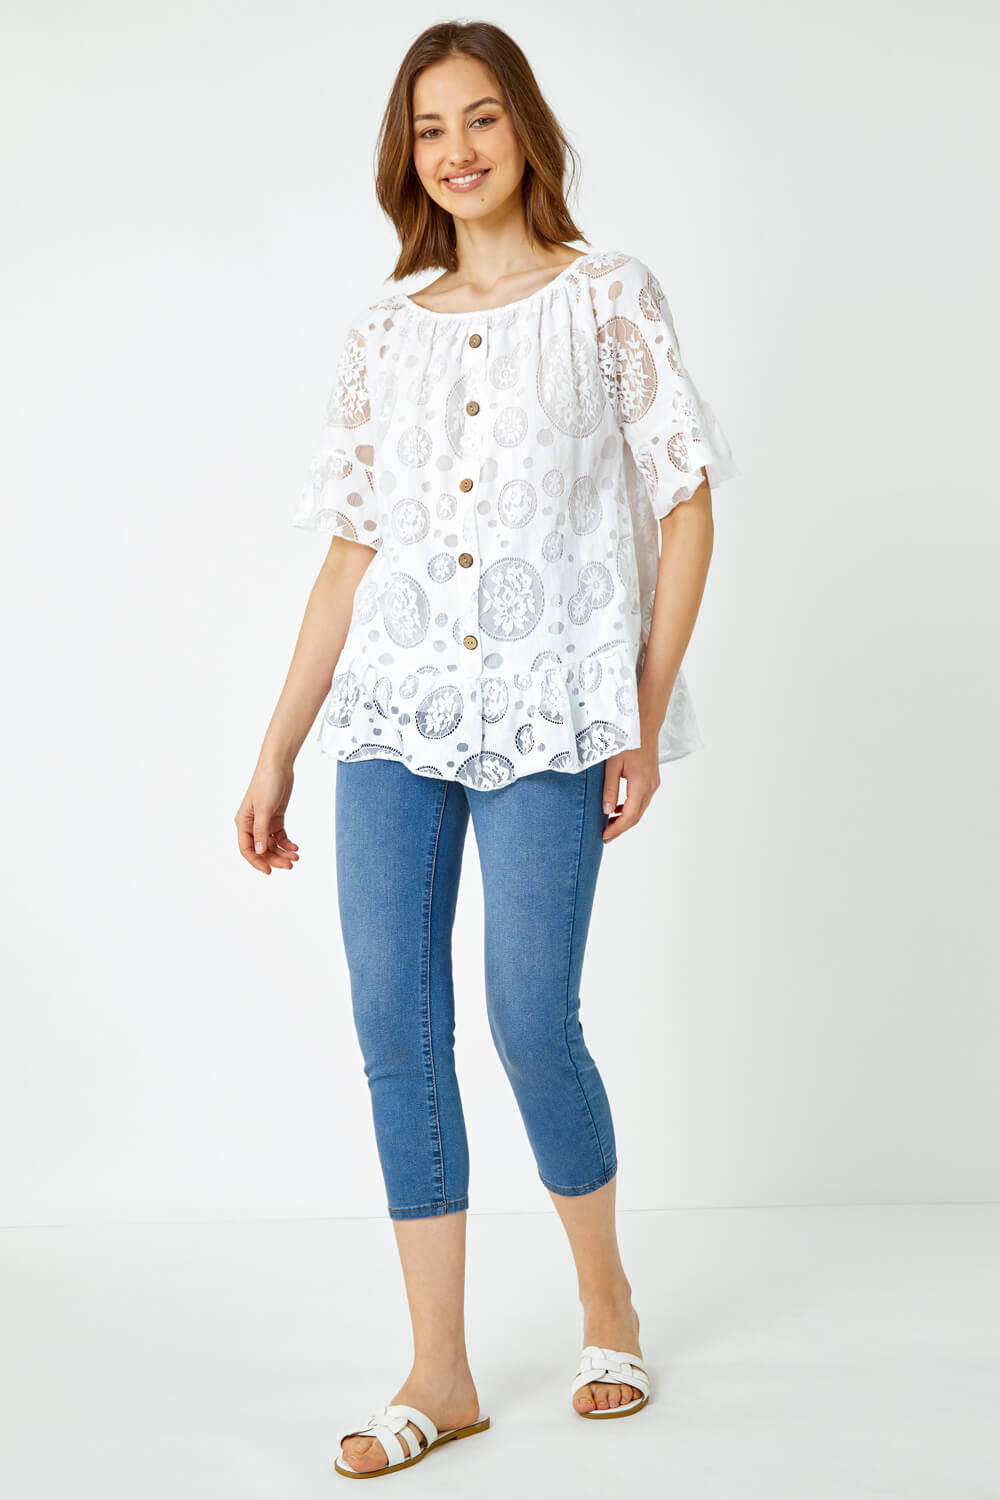 Ivory  Sheer Lace Button Detail Bardot Top, Image 2 of 5